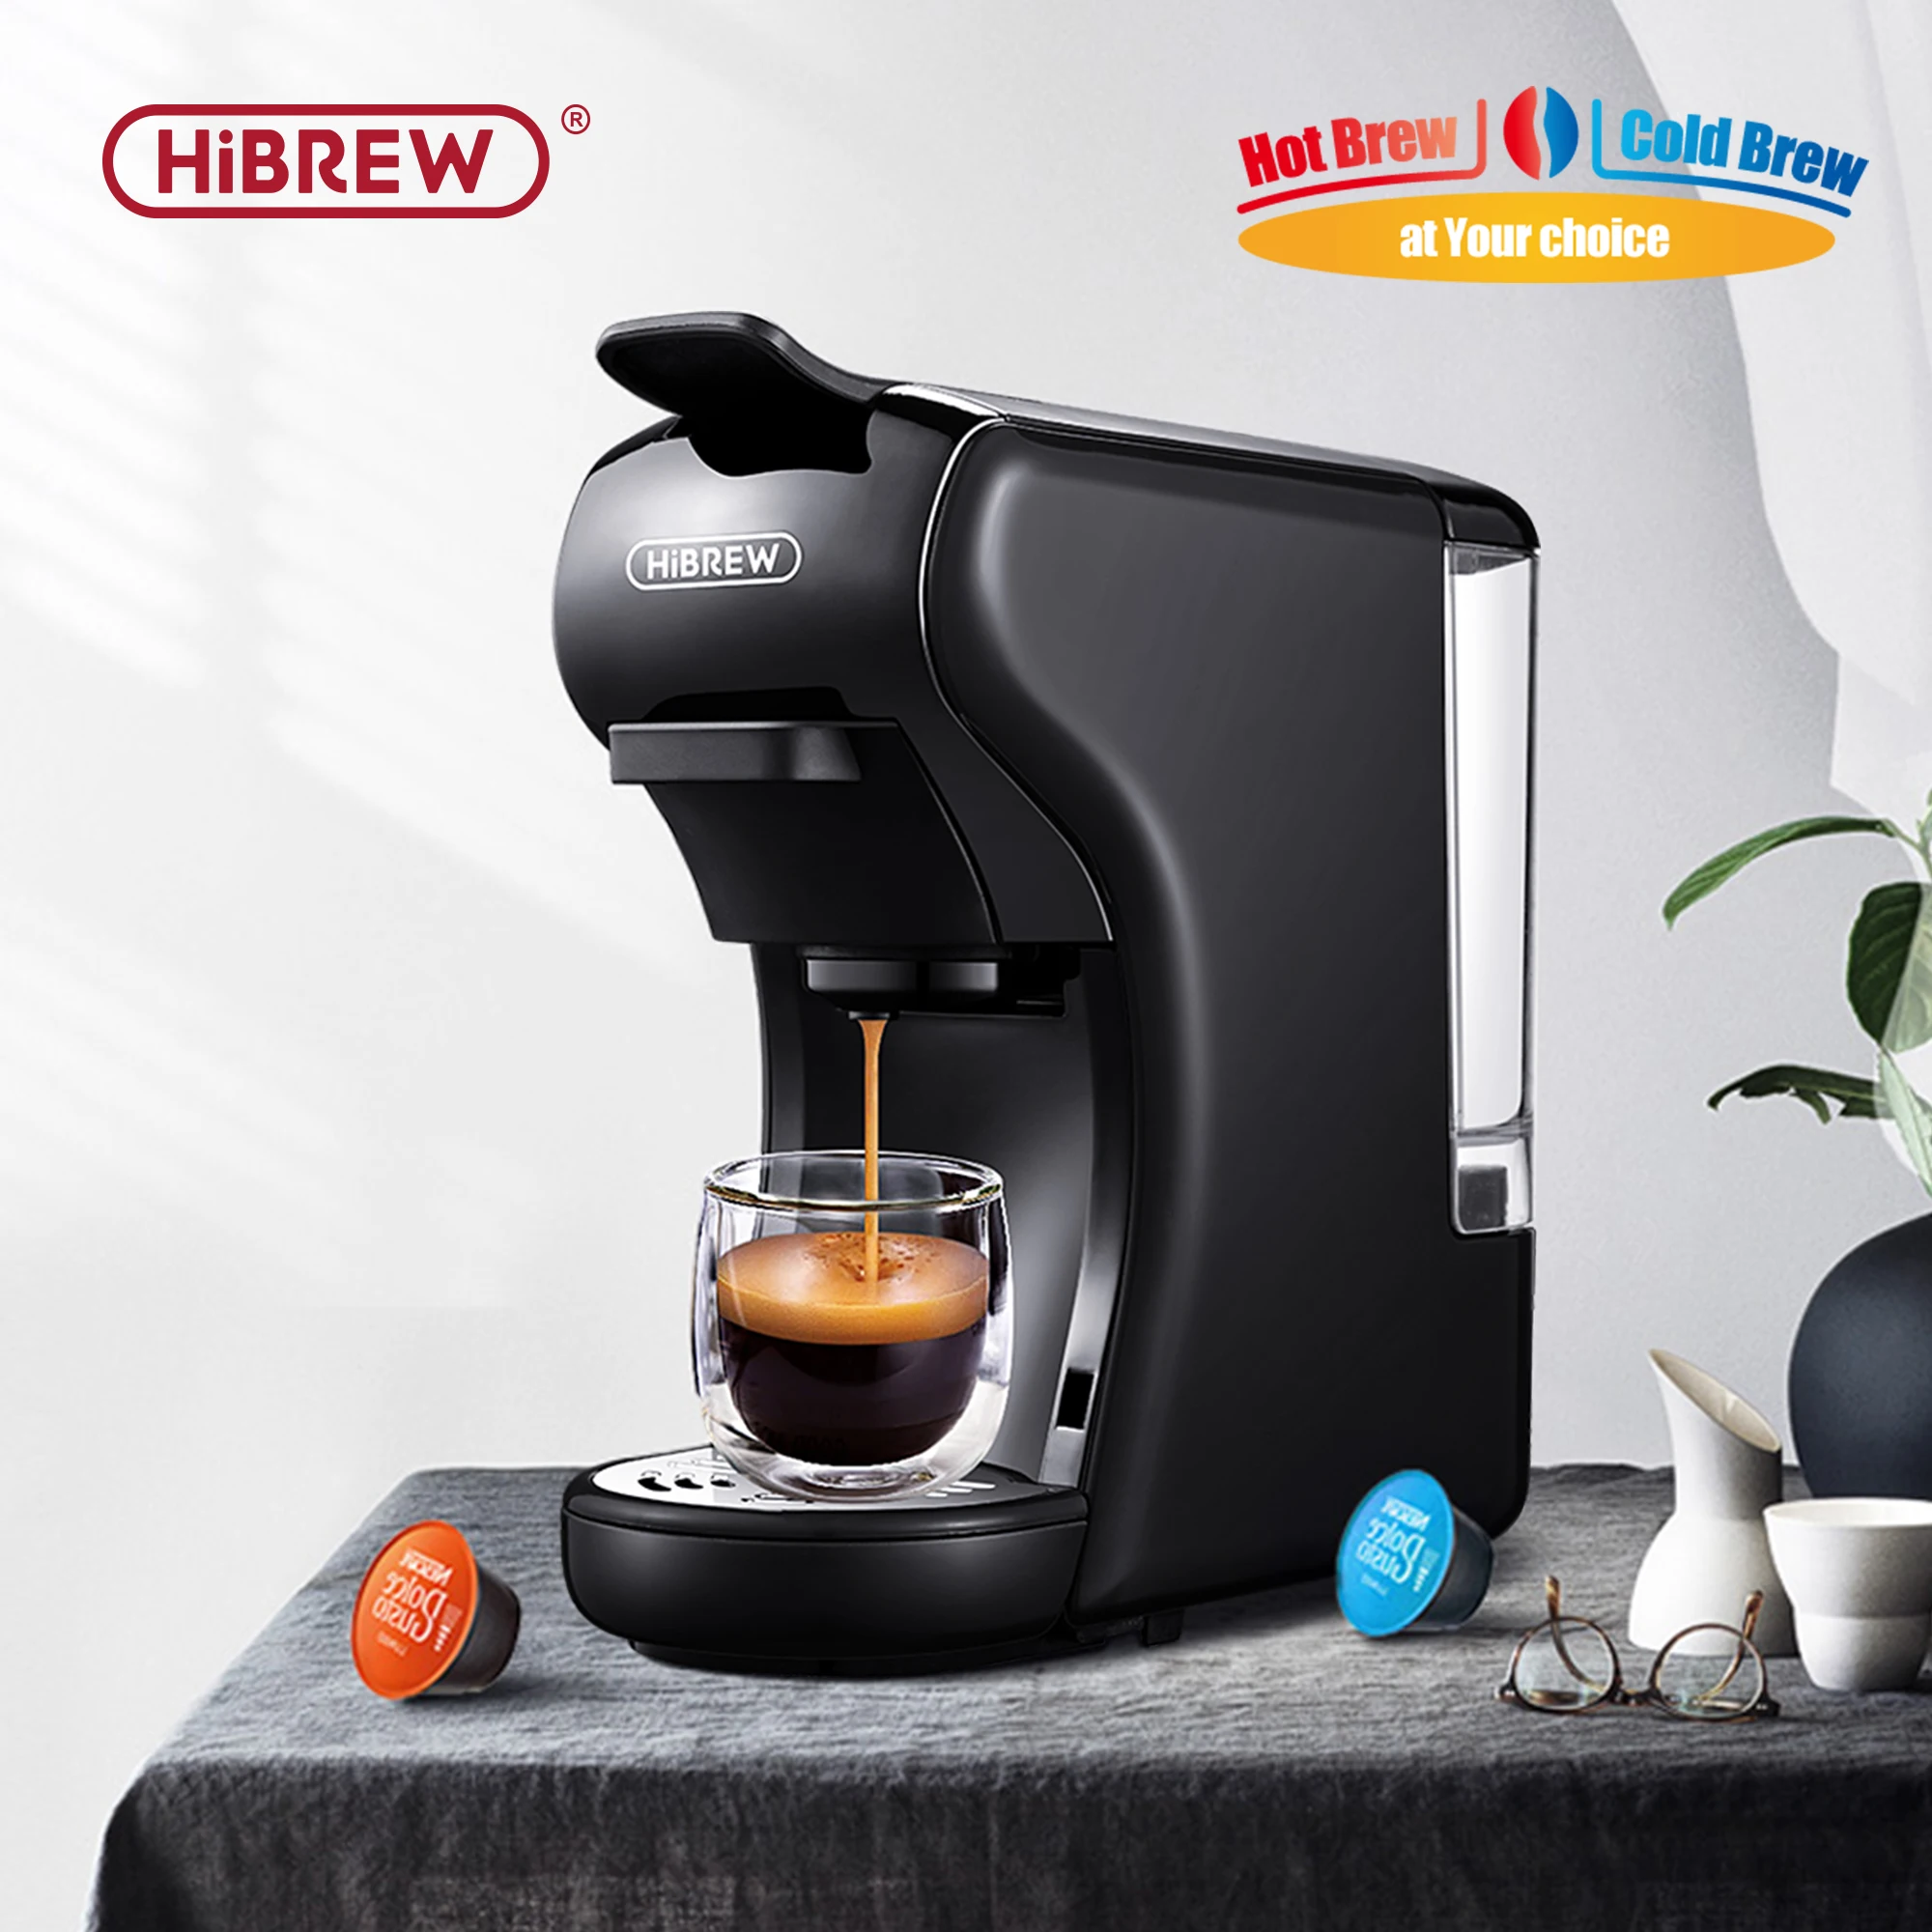 https://ae01.alicdn.com/kf/S1f560d8ff855466d872efeb5e352a3cc9/Hibrew-H1A-Coffee-Machine-hot-cold-4-in-1-compatible-with-multi-capsules-19-Bar-For.jpg